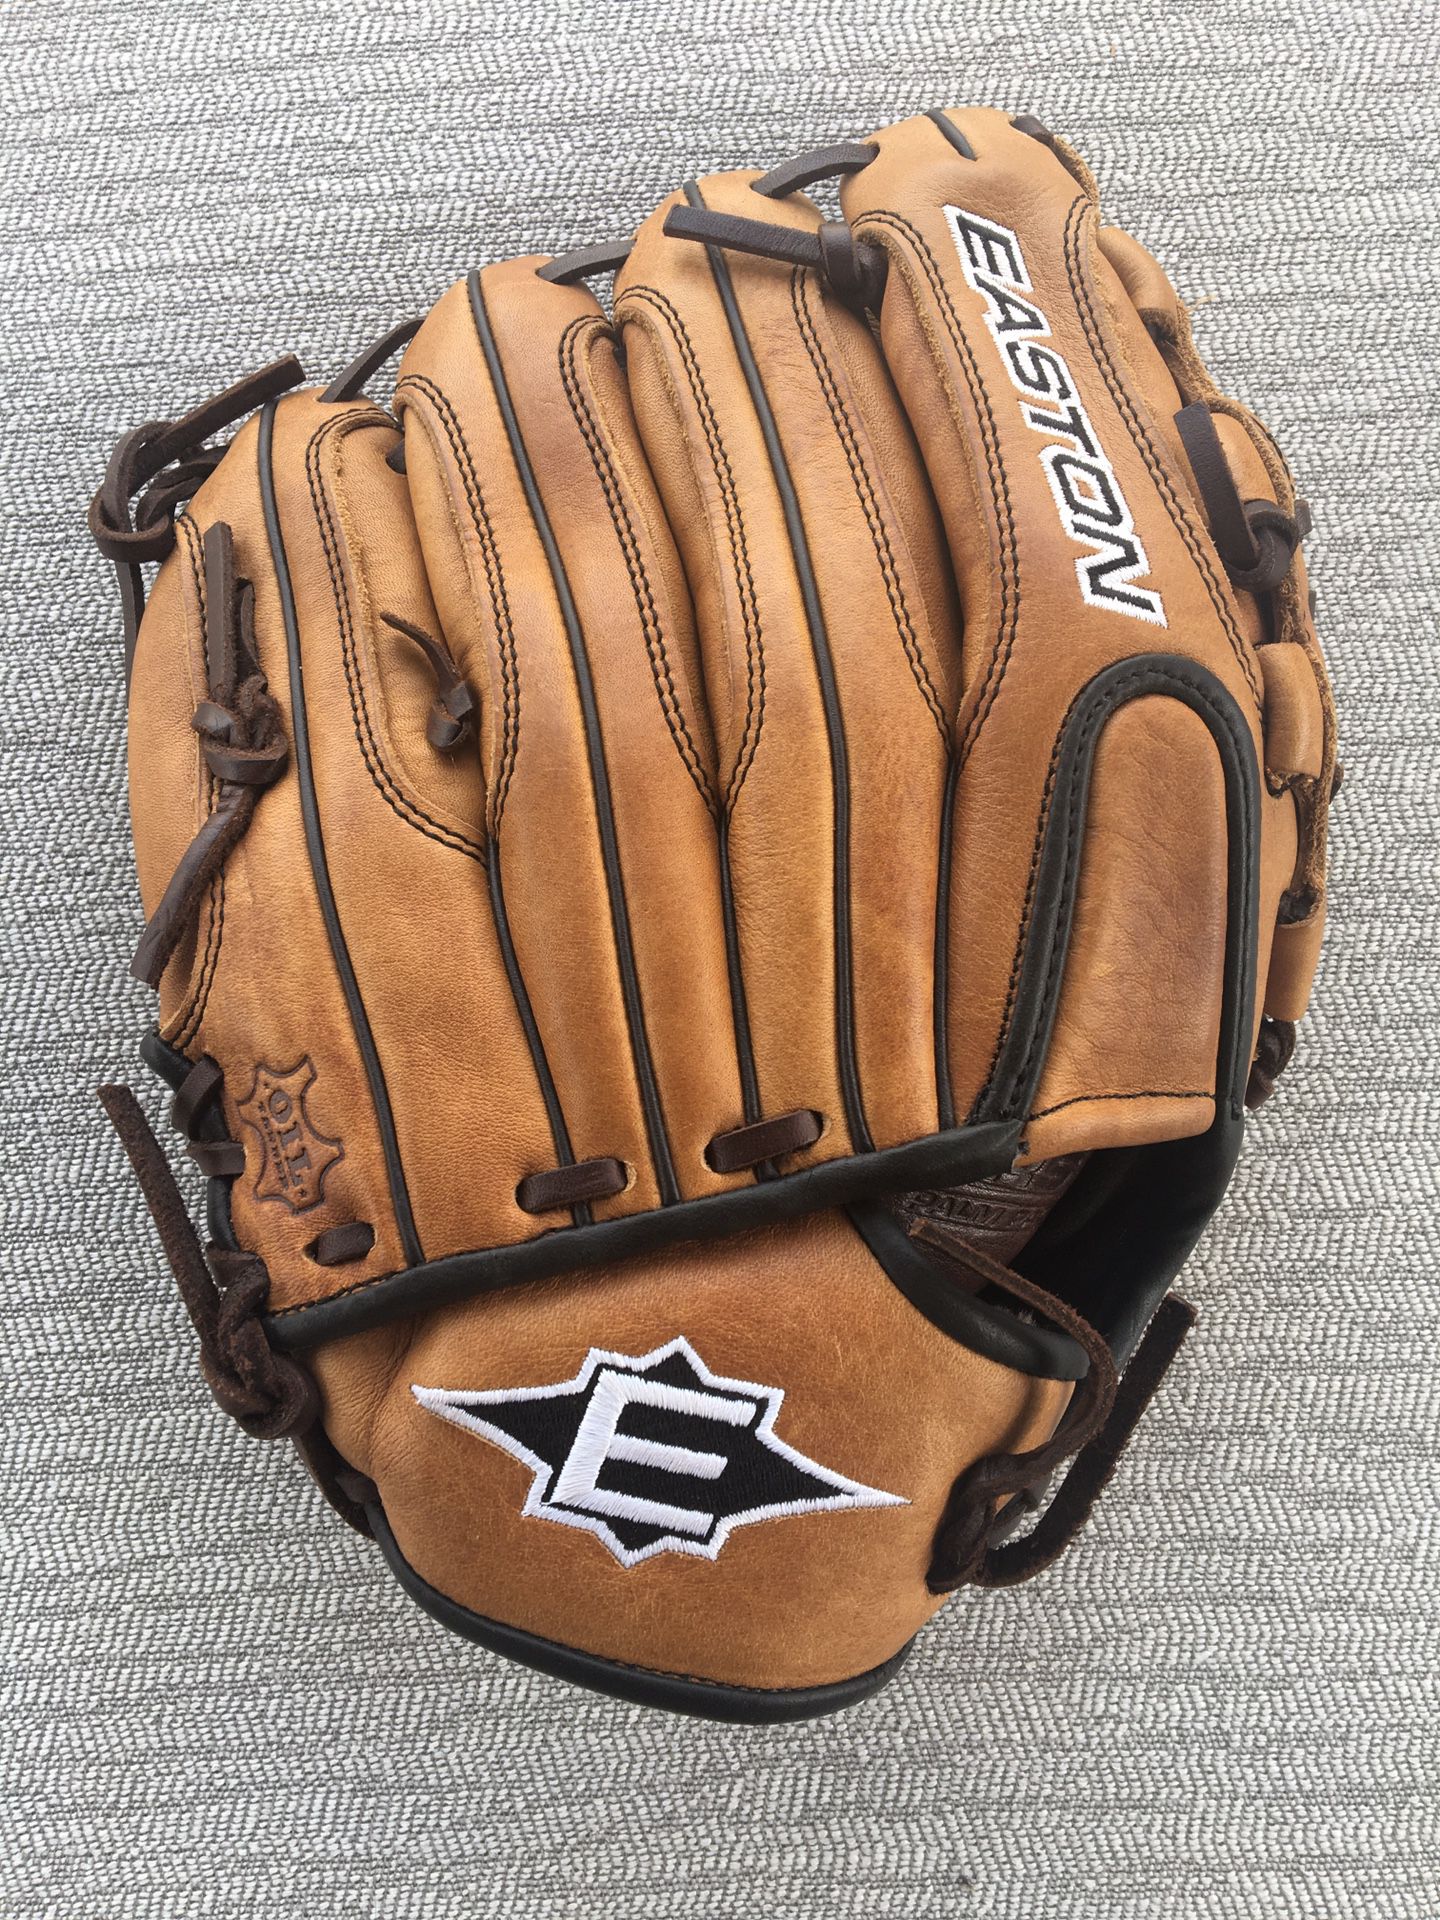 Easton 12” Baseball Glove In Like New Condition